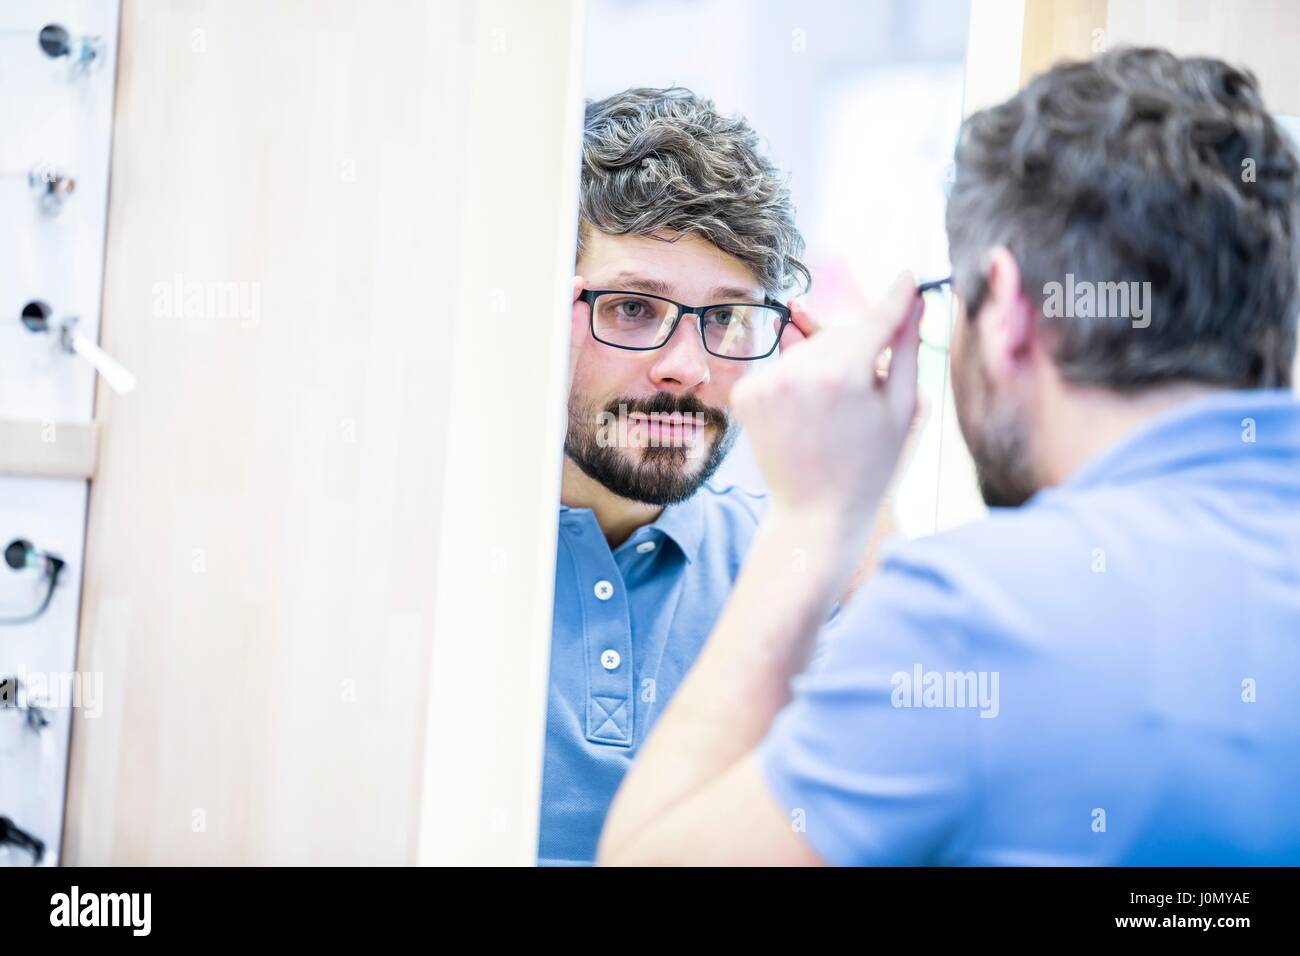 Man Trying on glasses in optometrist's shop. Banque D'Images